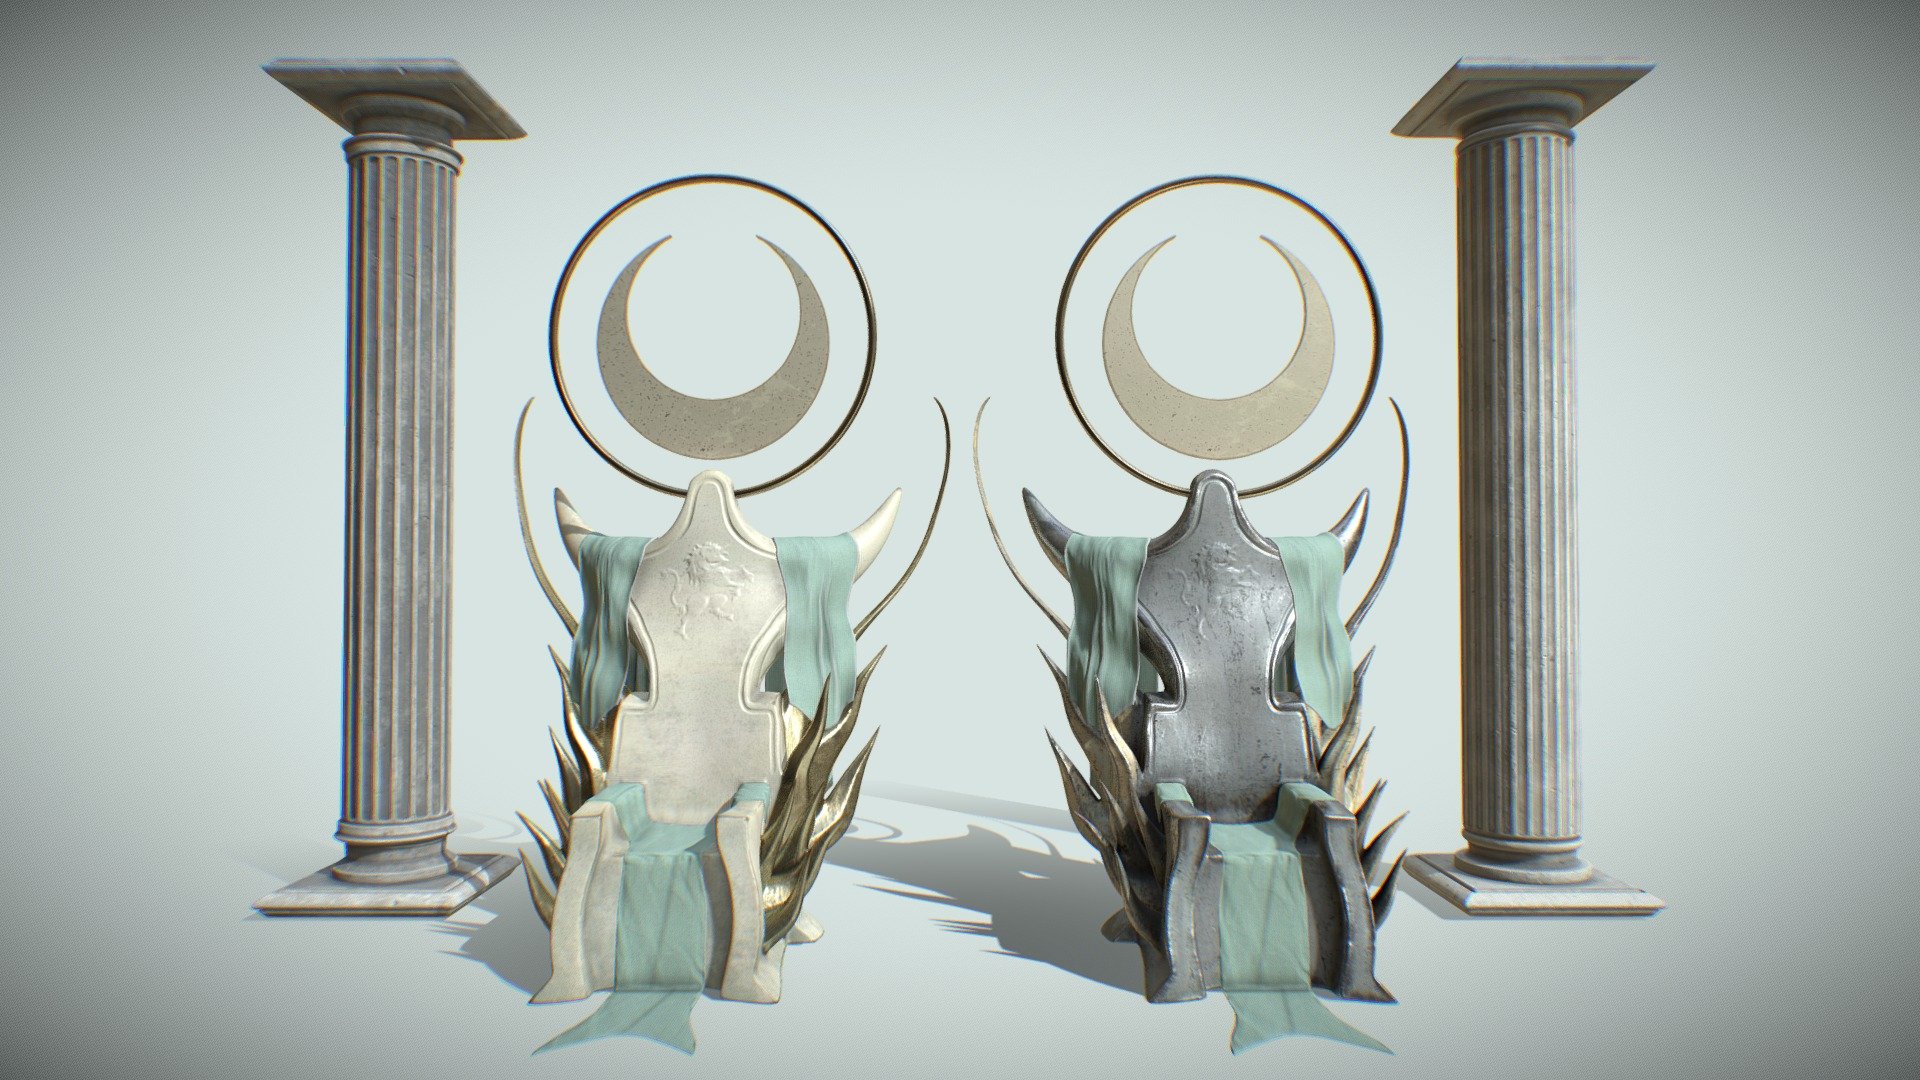 2 Versions of a sculpted throne, inspired by the sun, moon &amp; Greek Mythology.

2 Versions of a stone Column / pillar

Mix of 4K &amp; 2K Textures. 6 Sets total. 134Mb Unzipped.

Single Chair = 67K Verts. Not including fabric stuff.

Single Column/Pillar = 7K Verts

Additional organized Zip folder included. Obj &amp; Fbx Formats.

Textured in Substance / 3D Coat. Created in blender.

Dark Metal Alien Throne - https://skfb.ly/oAxyP
Free Throne - https://skfb.ly/ovvIq - Throne of Sol - Buy Royalty Free 3D model by bossdeff 3d model